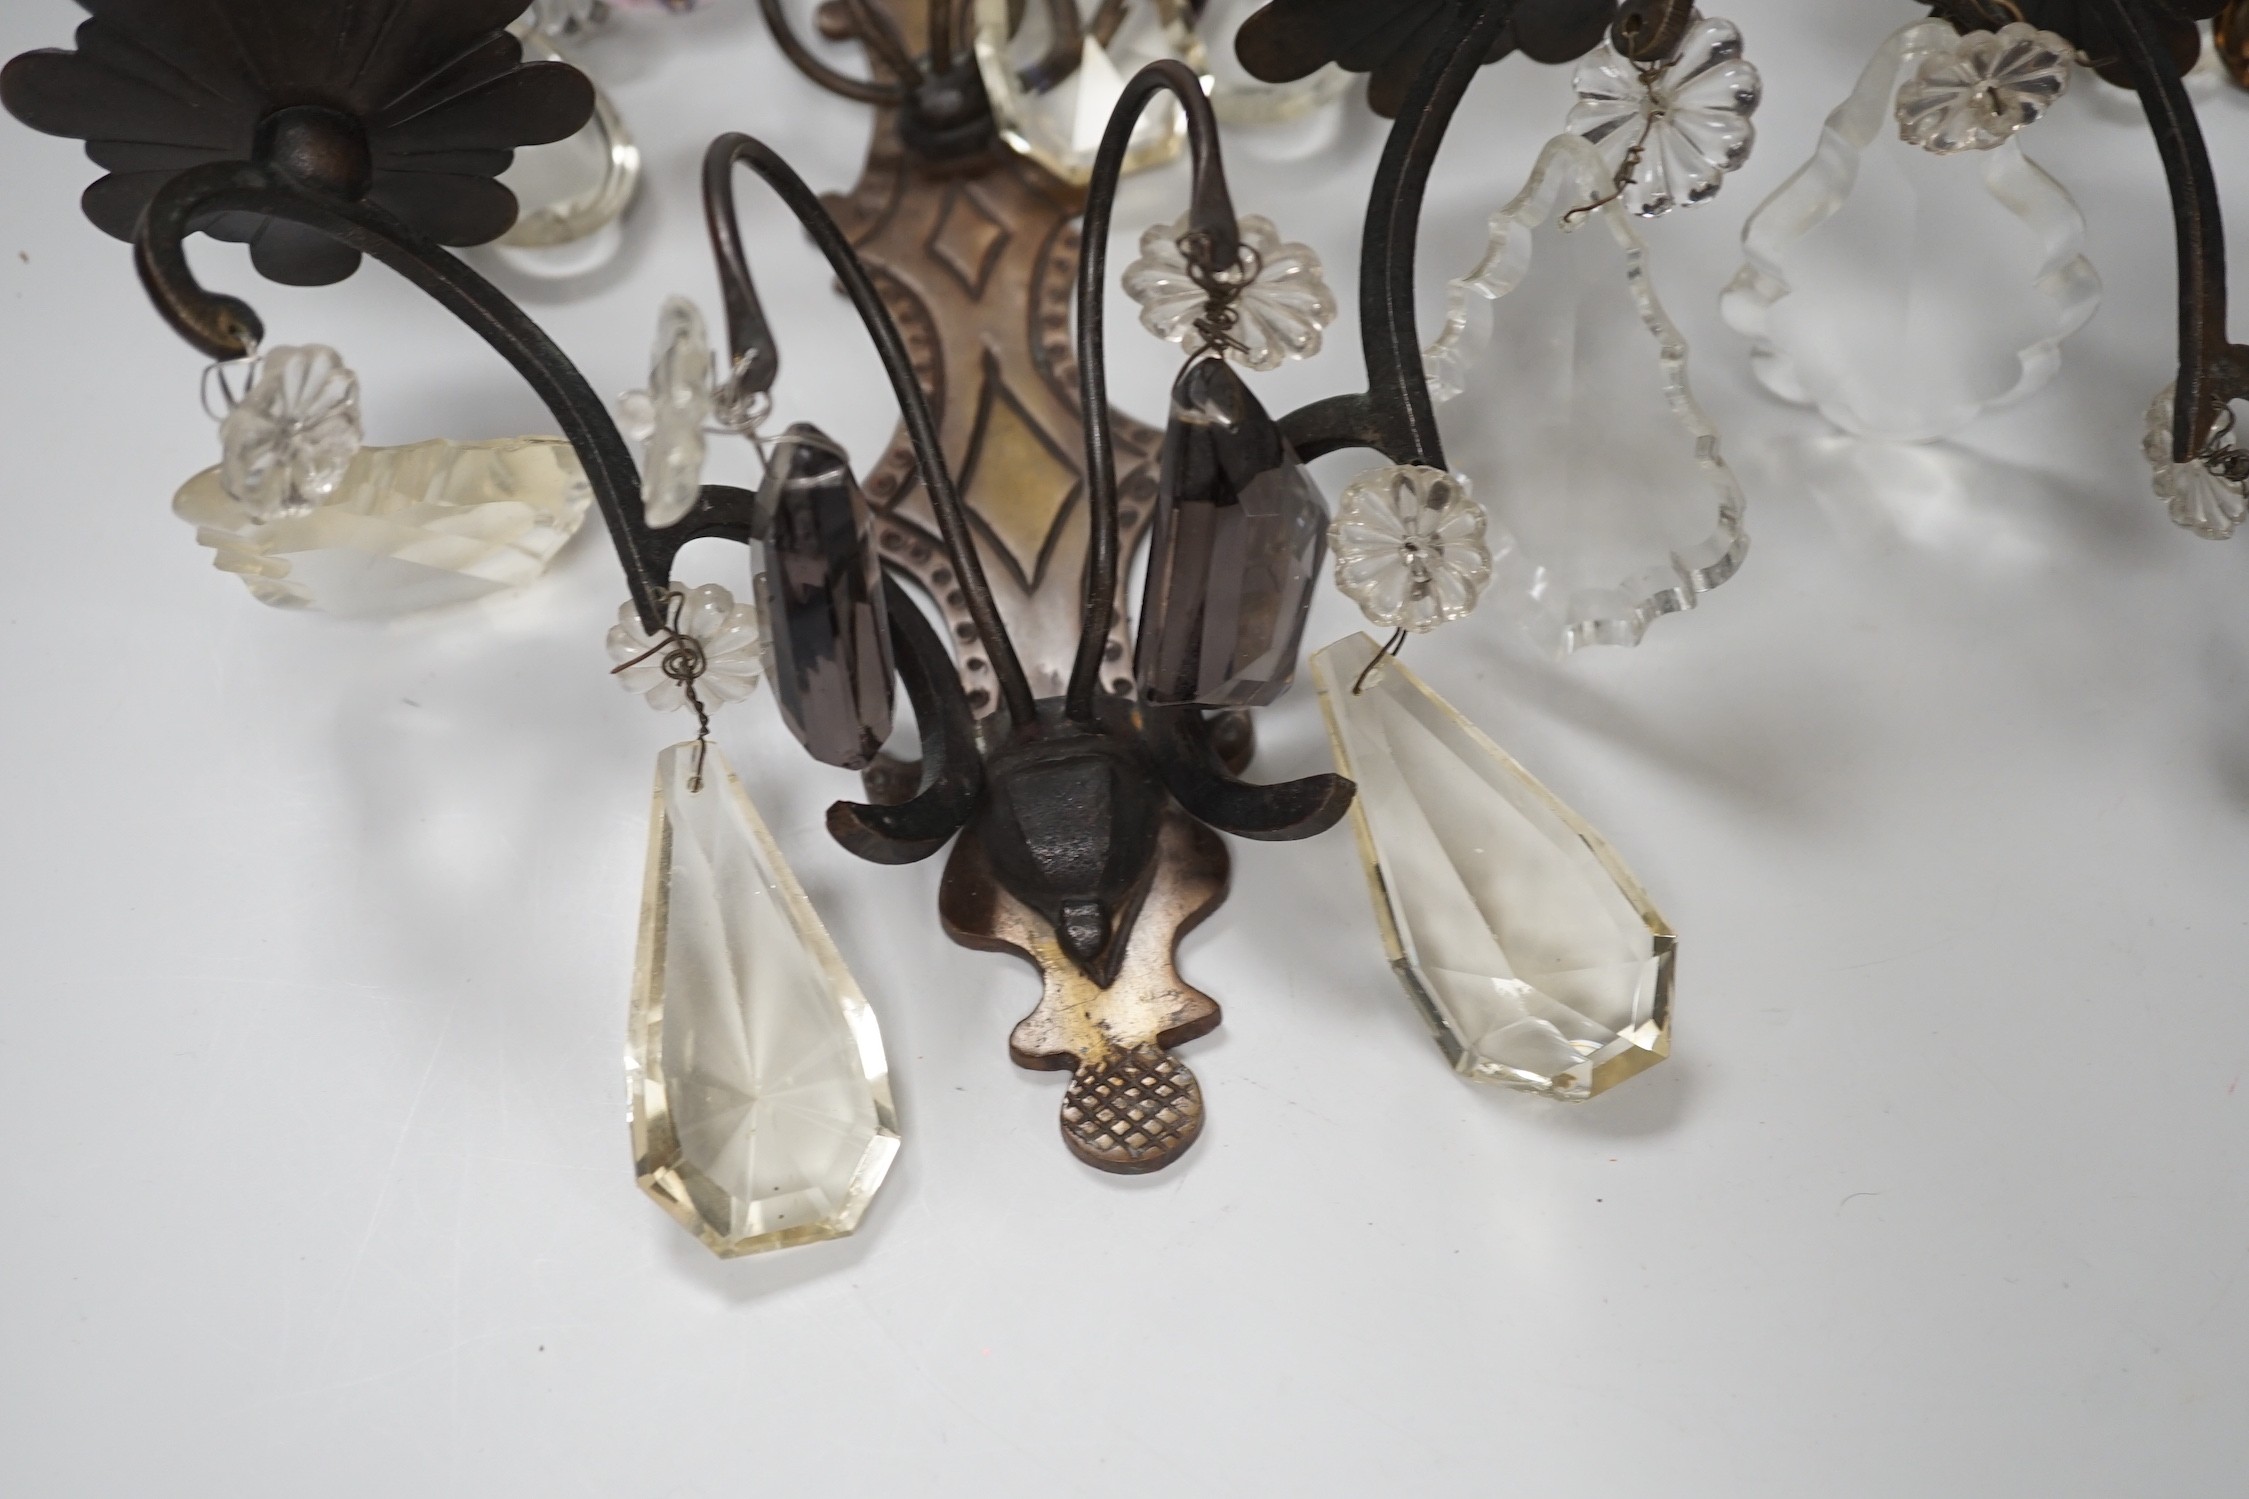 A pair of bronze or brass two branch wall sconces with cut glass drops